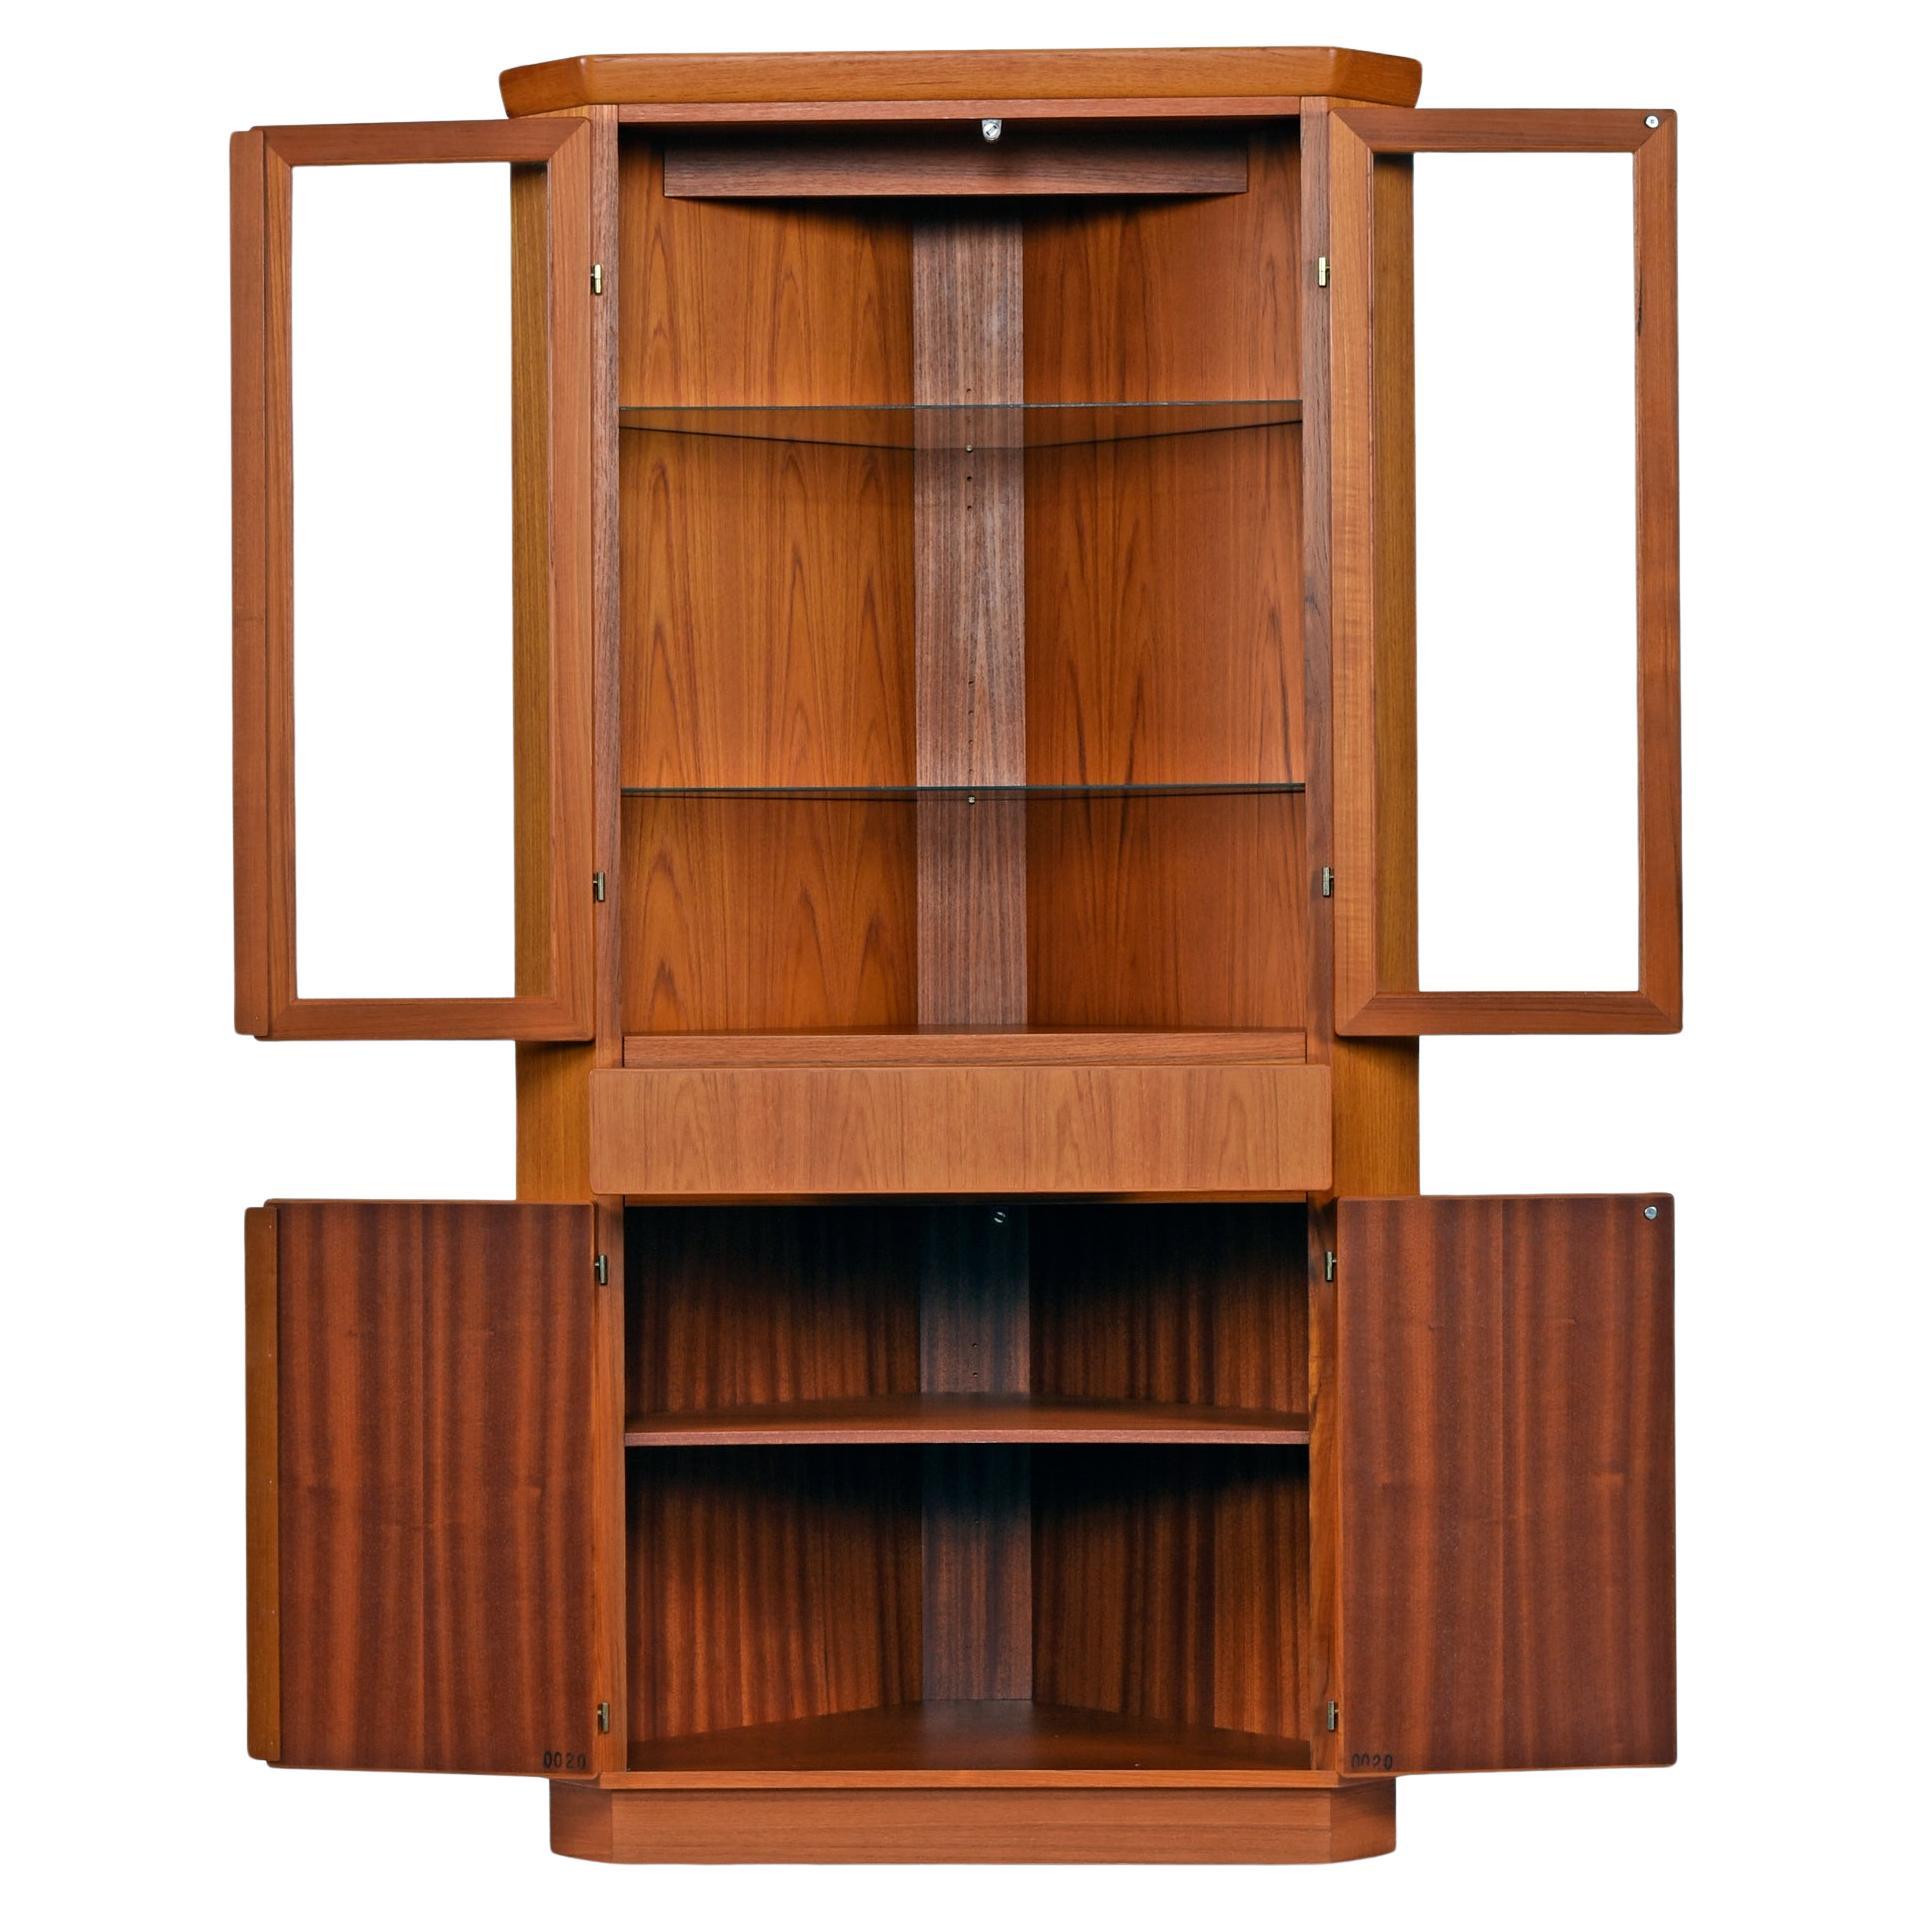 Vintage Danish teak corner display cabinet by Skovby. One piece unit with lighted display area on the top section. There are two glass shelves which are adjustable height and removable. A single light at top illuminates the display with a warm,